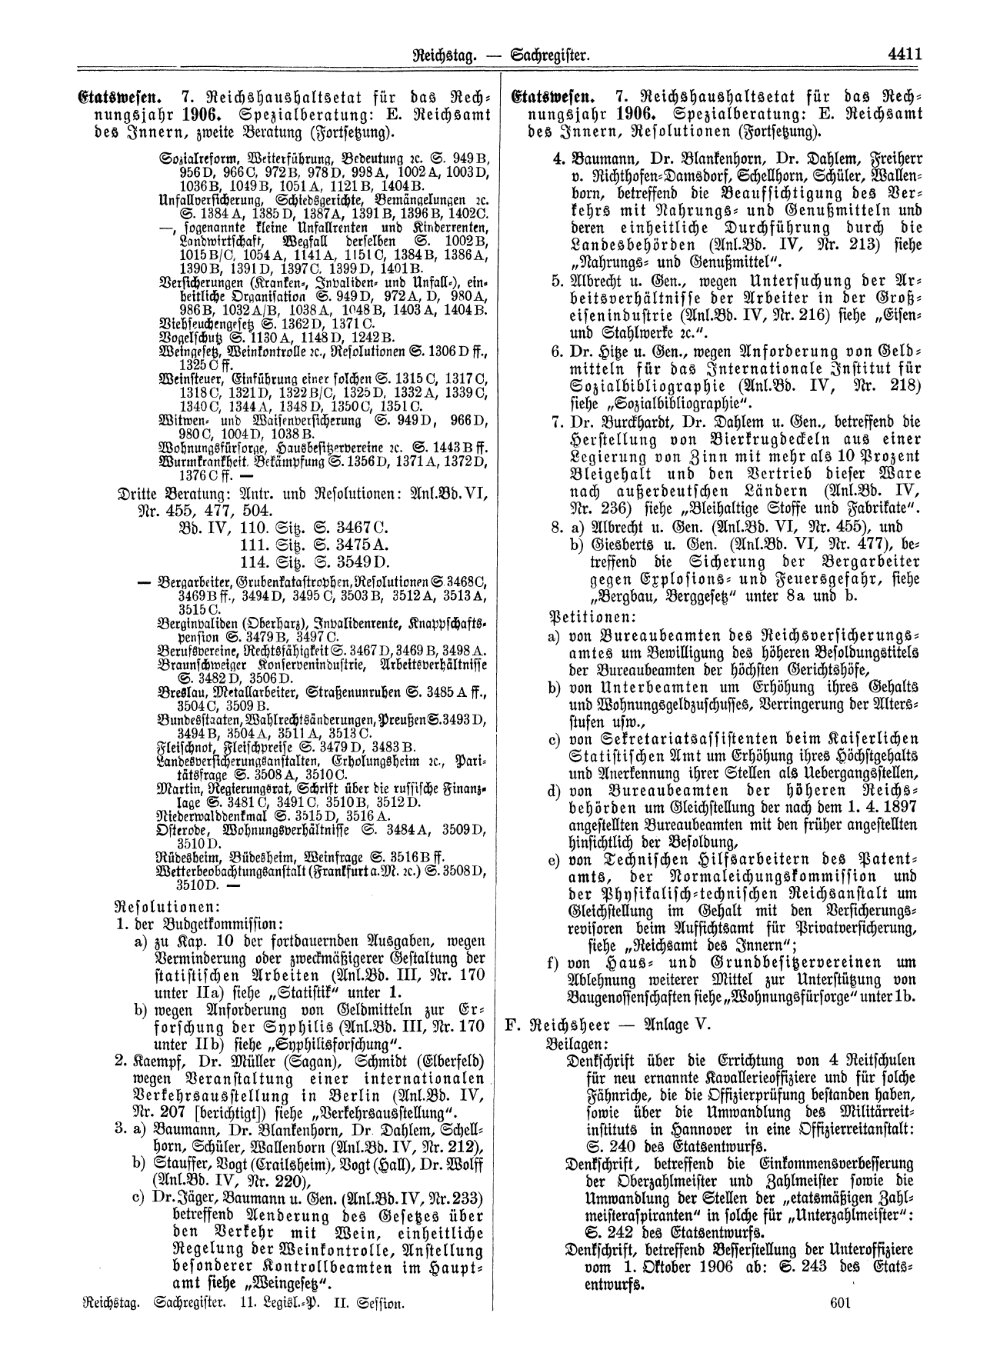 Scan of page 4411